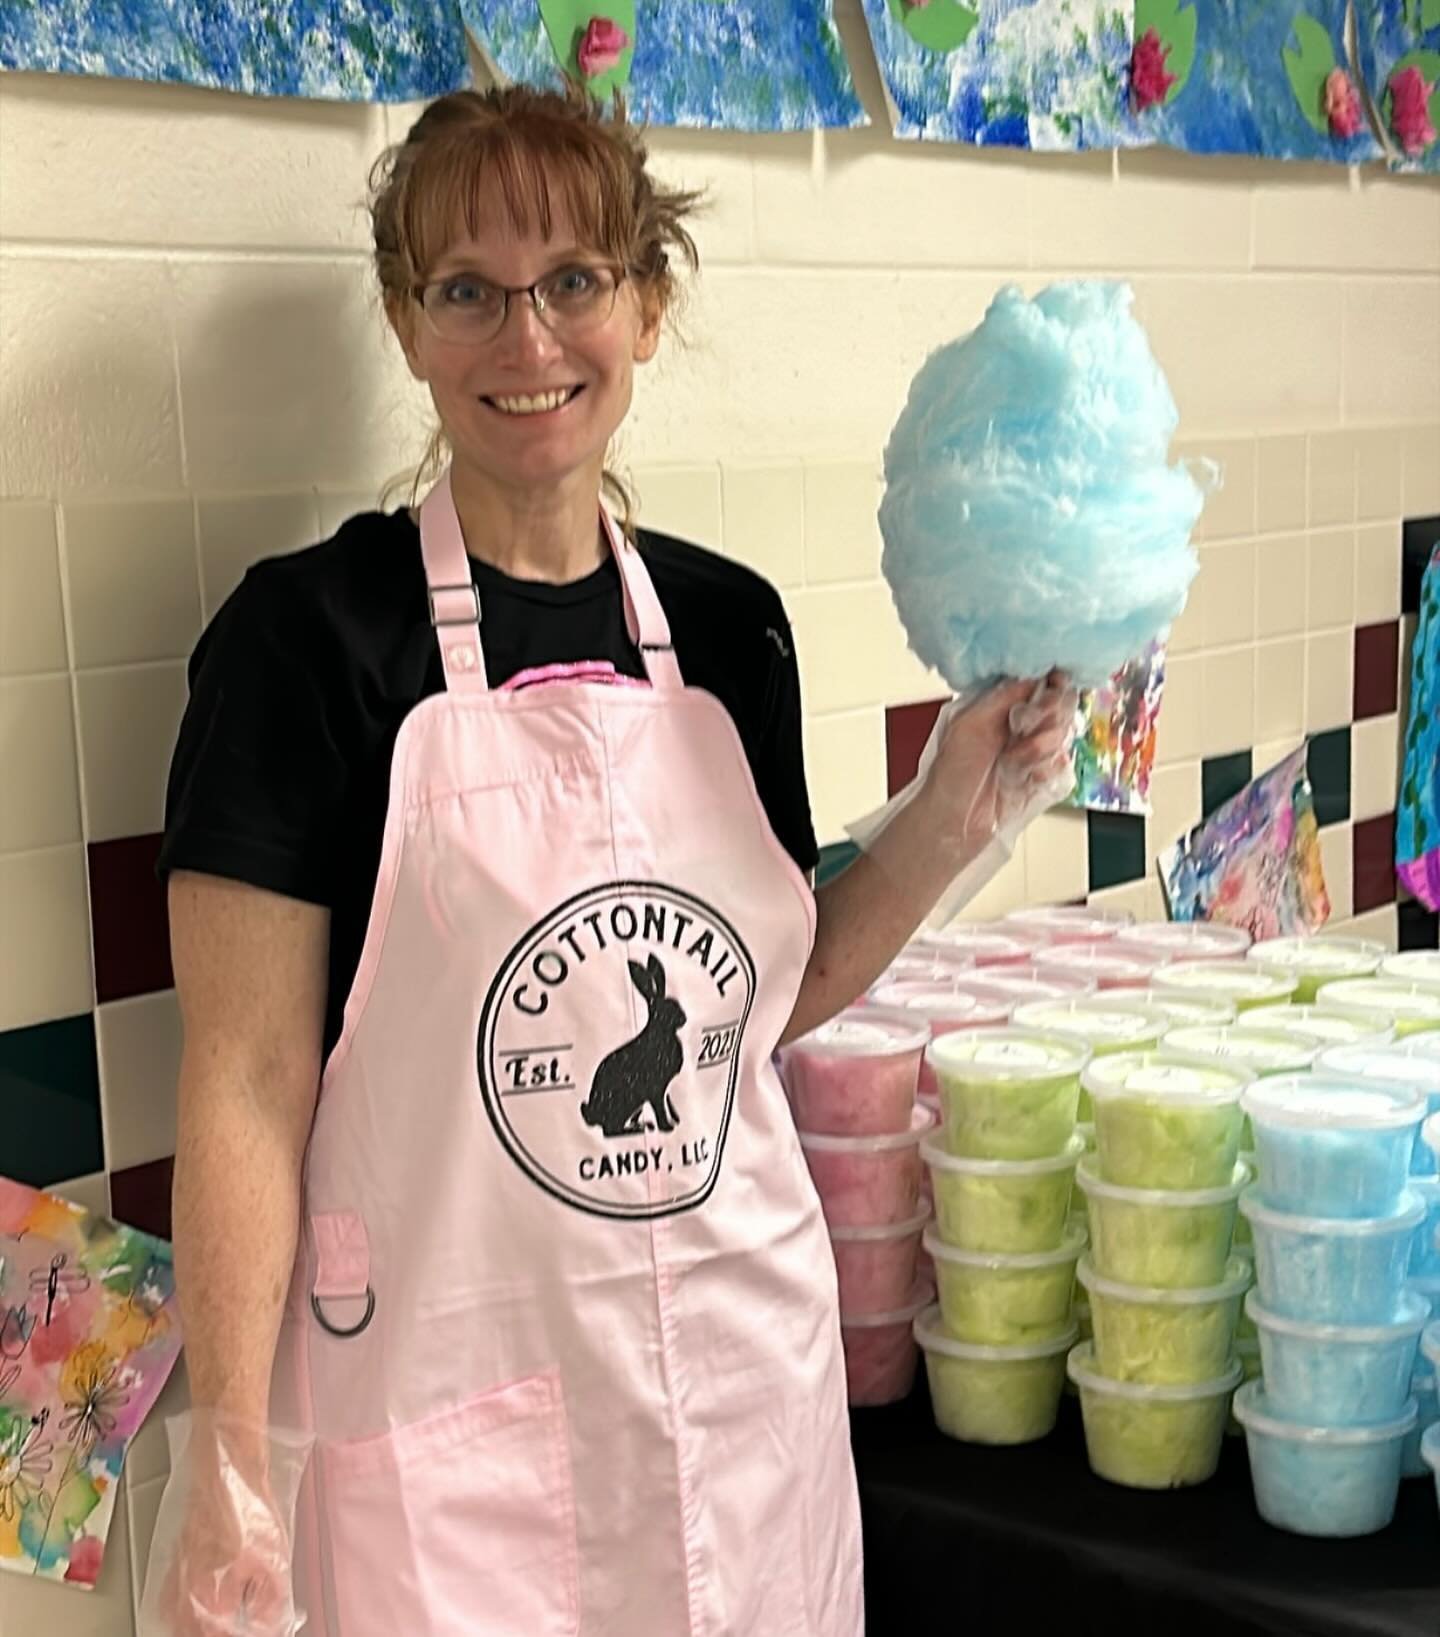 School carnivals are the best! We had a fantastic evening at the Valley View Carnival in Ashwaubenon.  Planning your school&rsquo;s carnival? Give us a call!